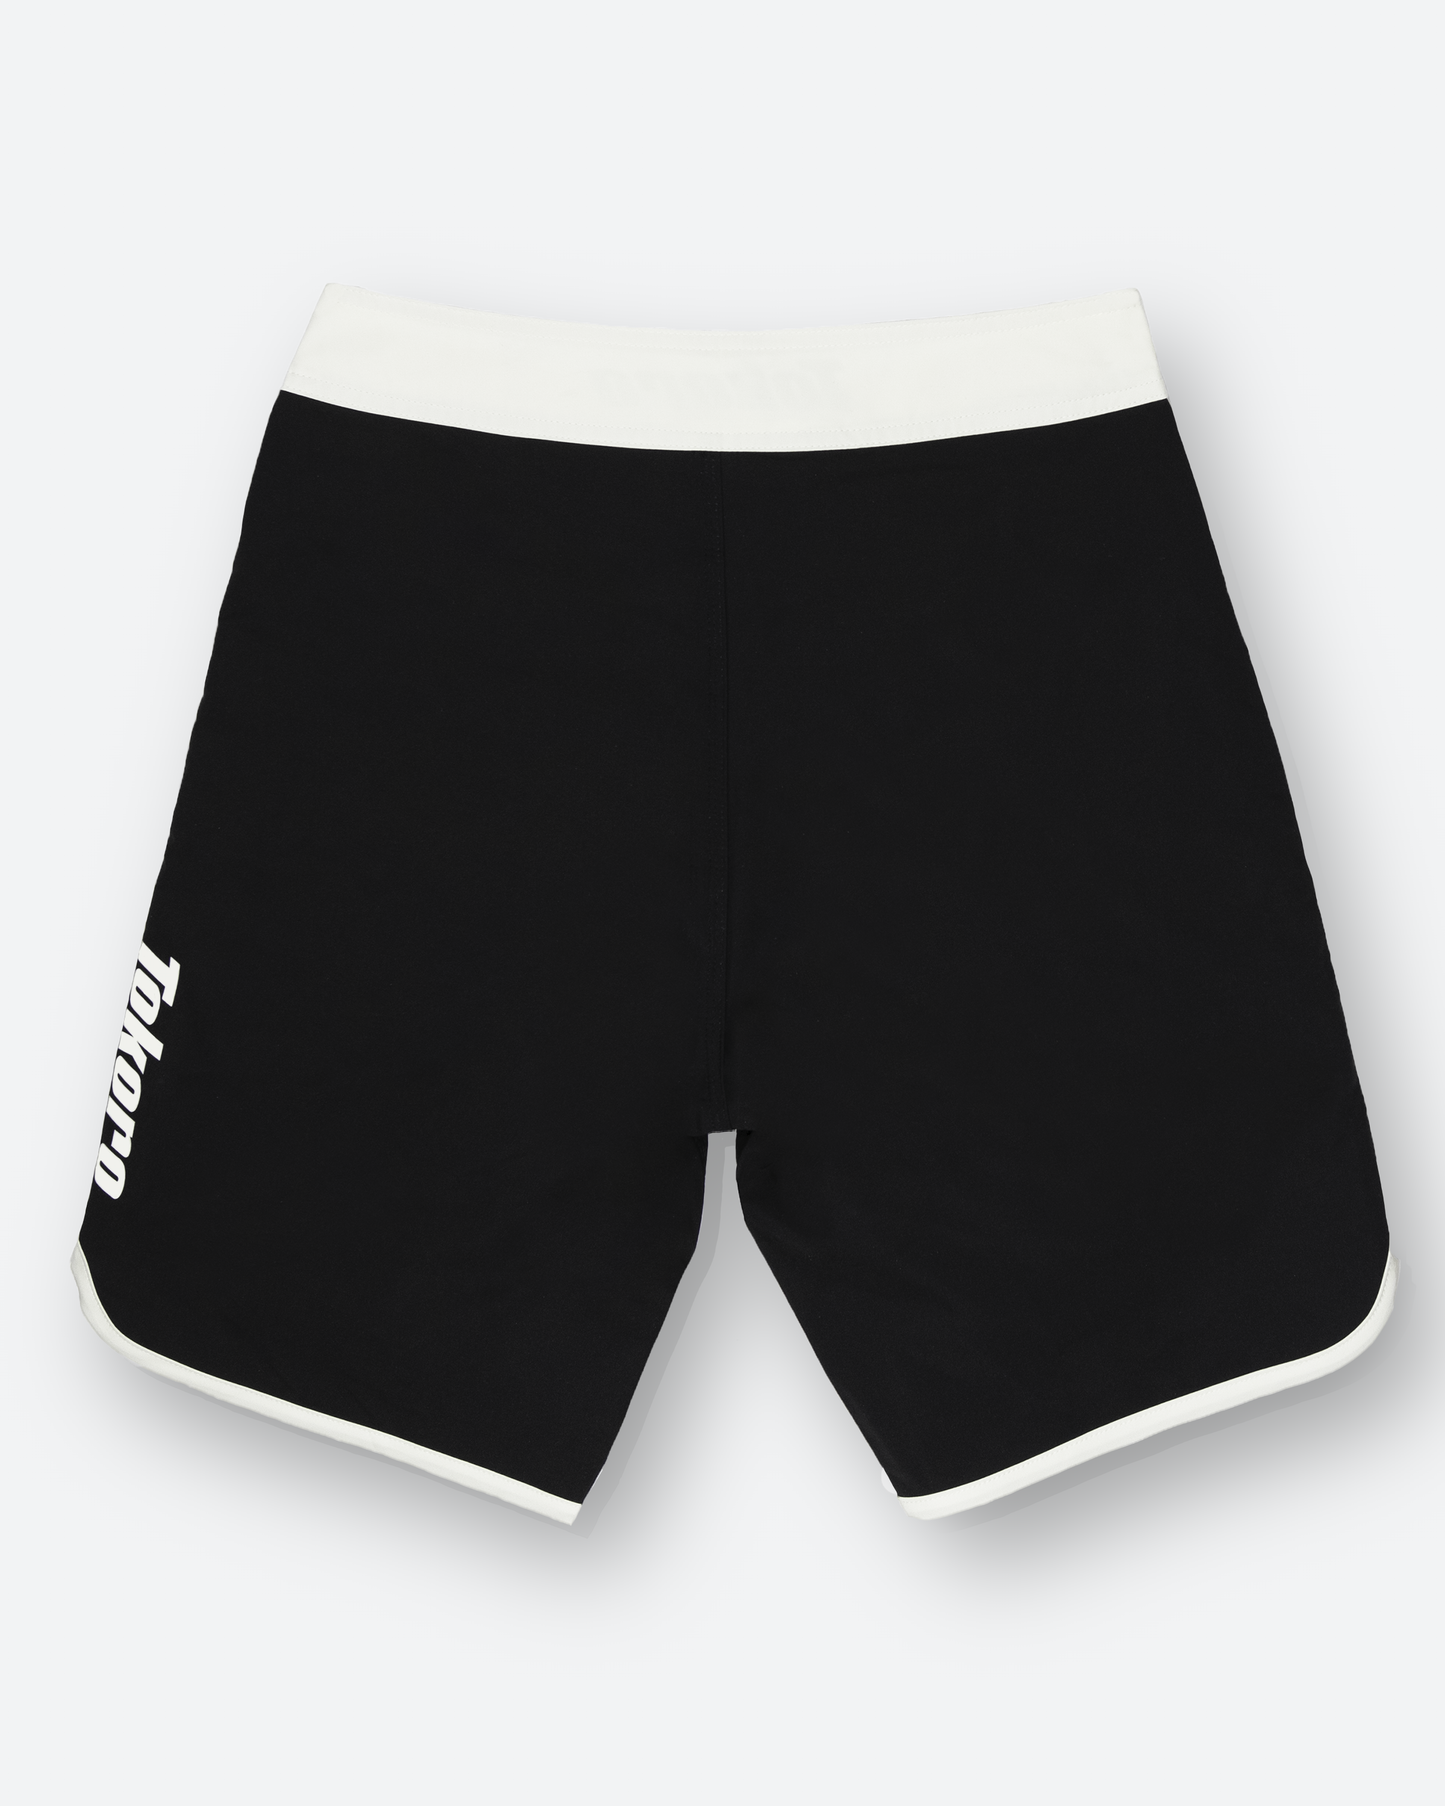 Priority Series High Performance Boardshorts - Contrast Black x White